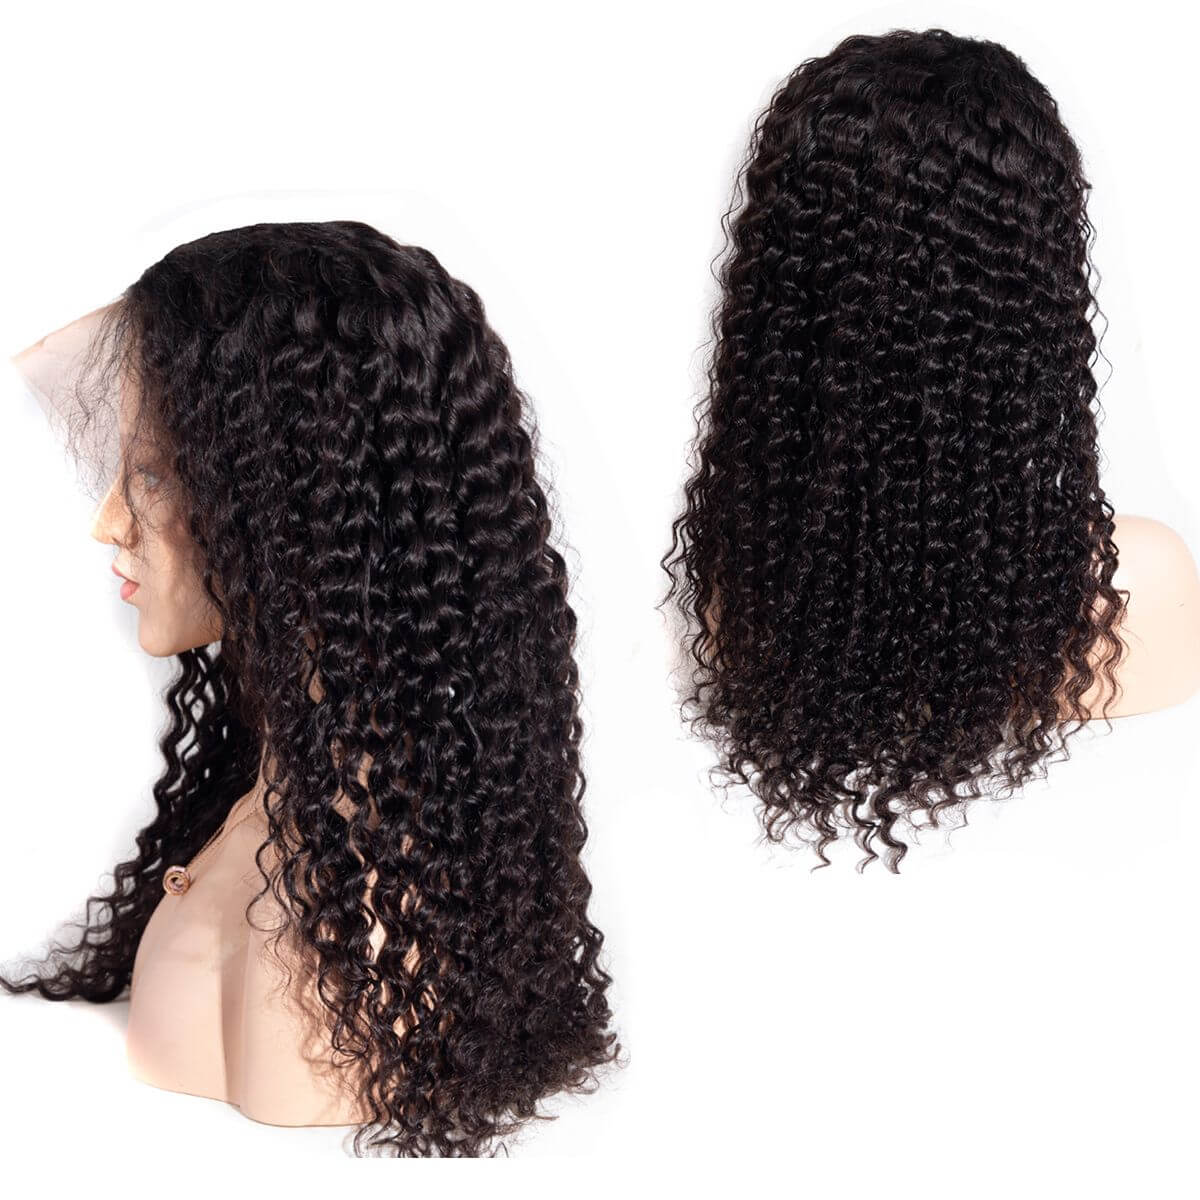 360 deep wave wig,360 deep lace wig,360 deep wave frontal wigs,deep wave 360 lace frontal wigs,deep wave lace front wig,360 lace front wig,360 front wig,lace front 360 wigs,cheap 360 lace front wigs